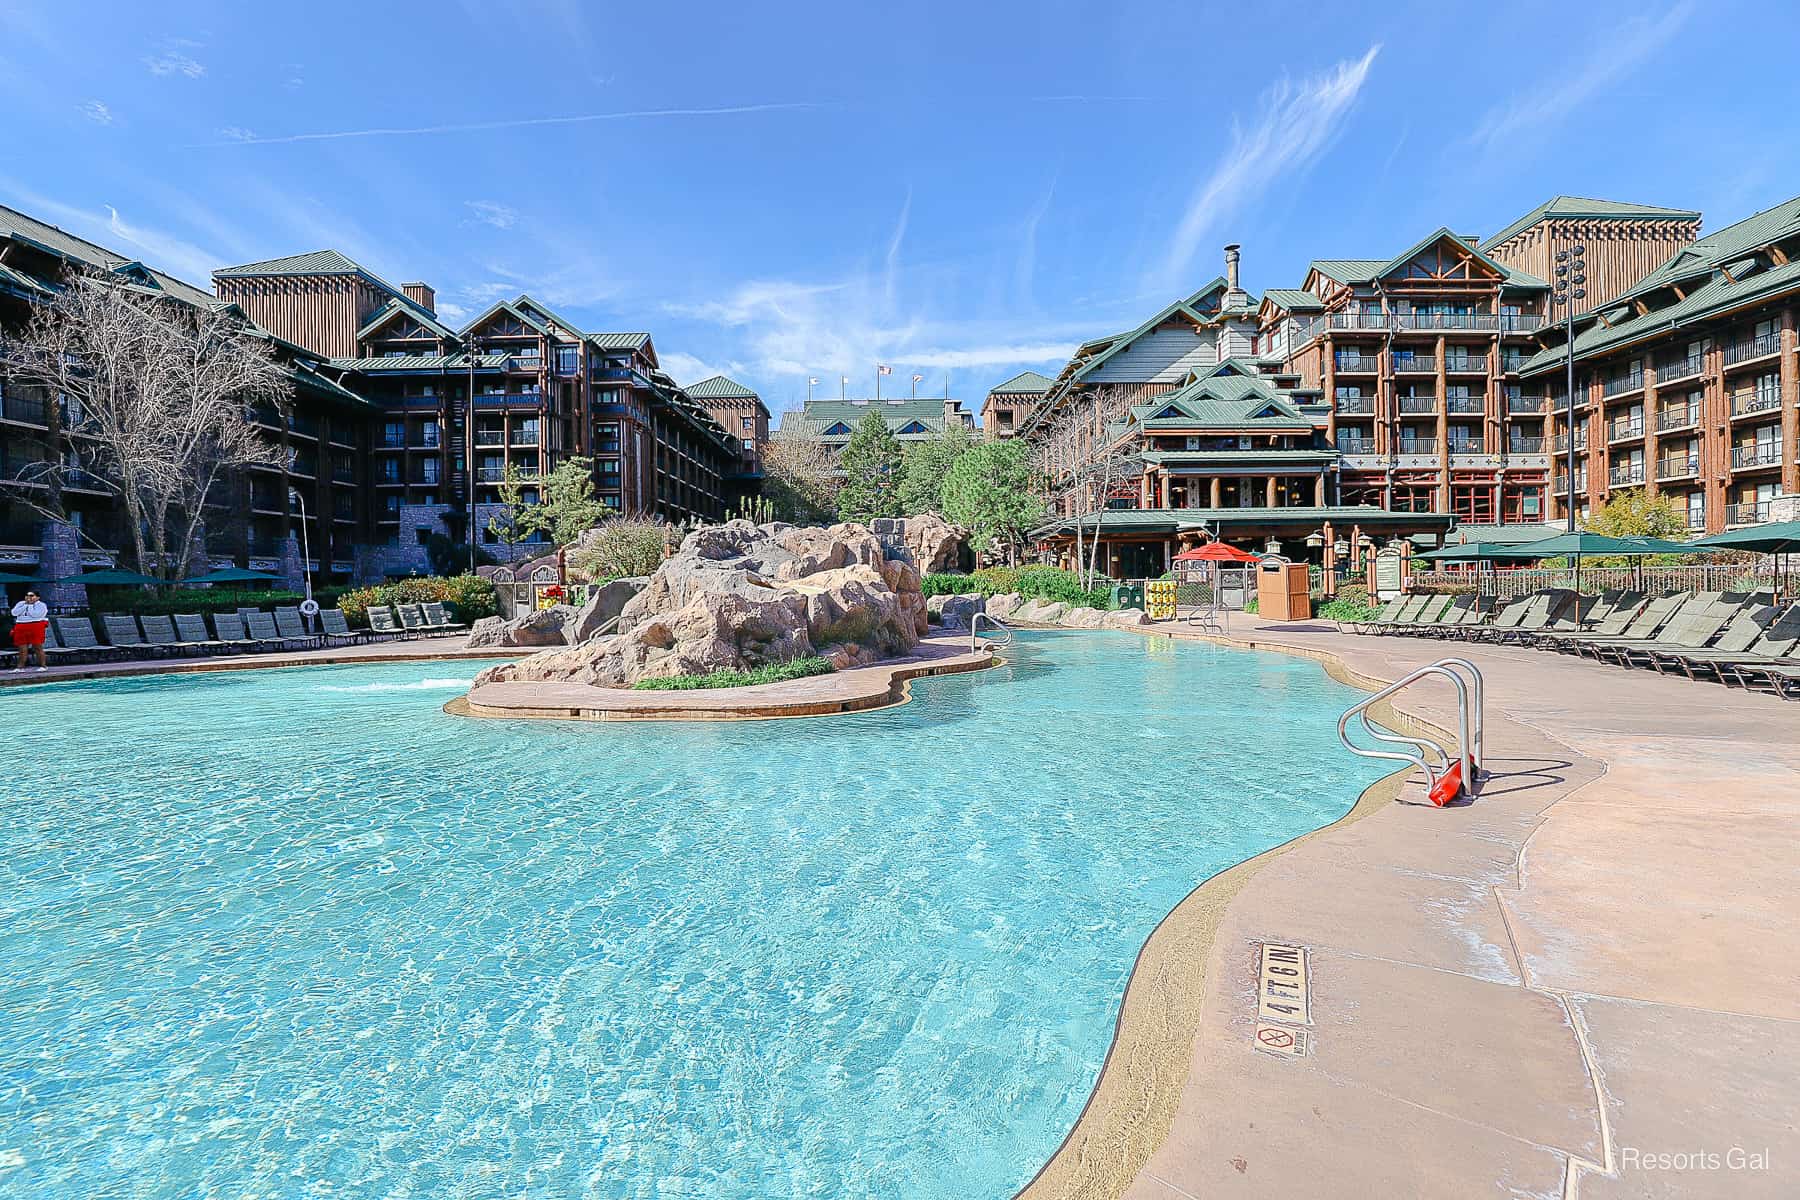 a pool with a rock formation in the center of it at Disney's Wilderness Lodge